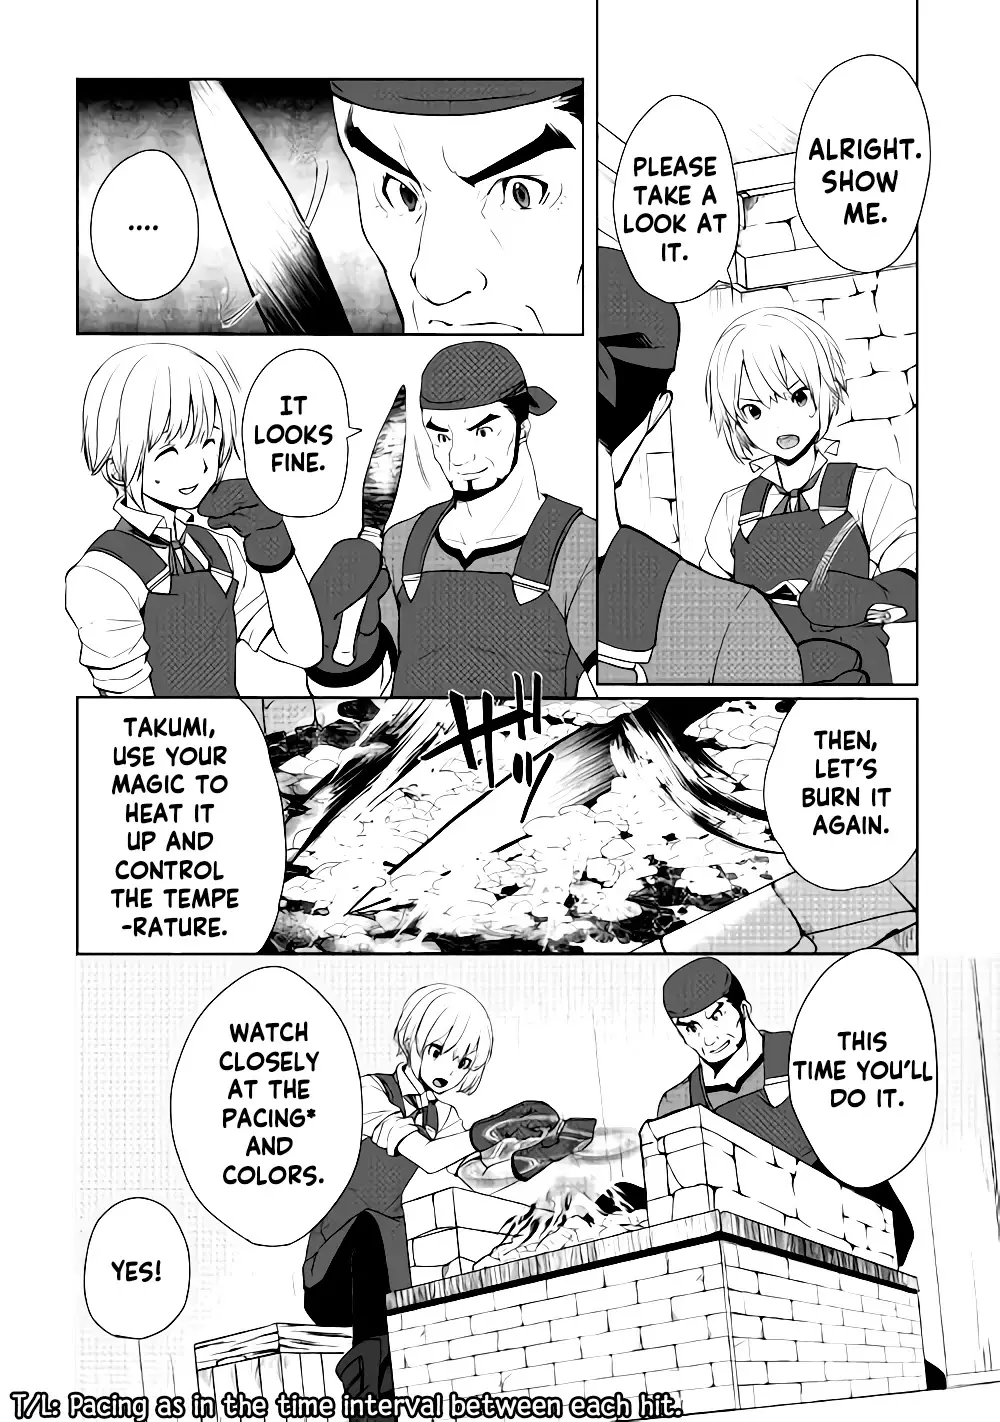 Someday Will I Be The Greatest Alchemist? - 5 page 2